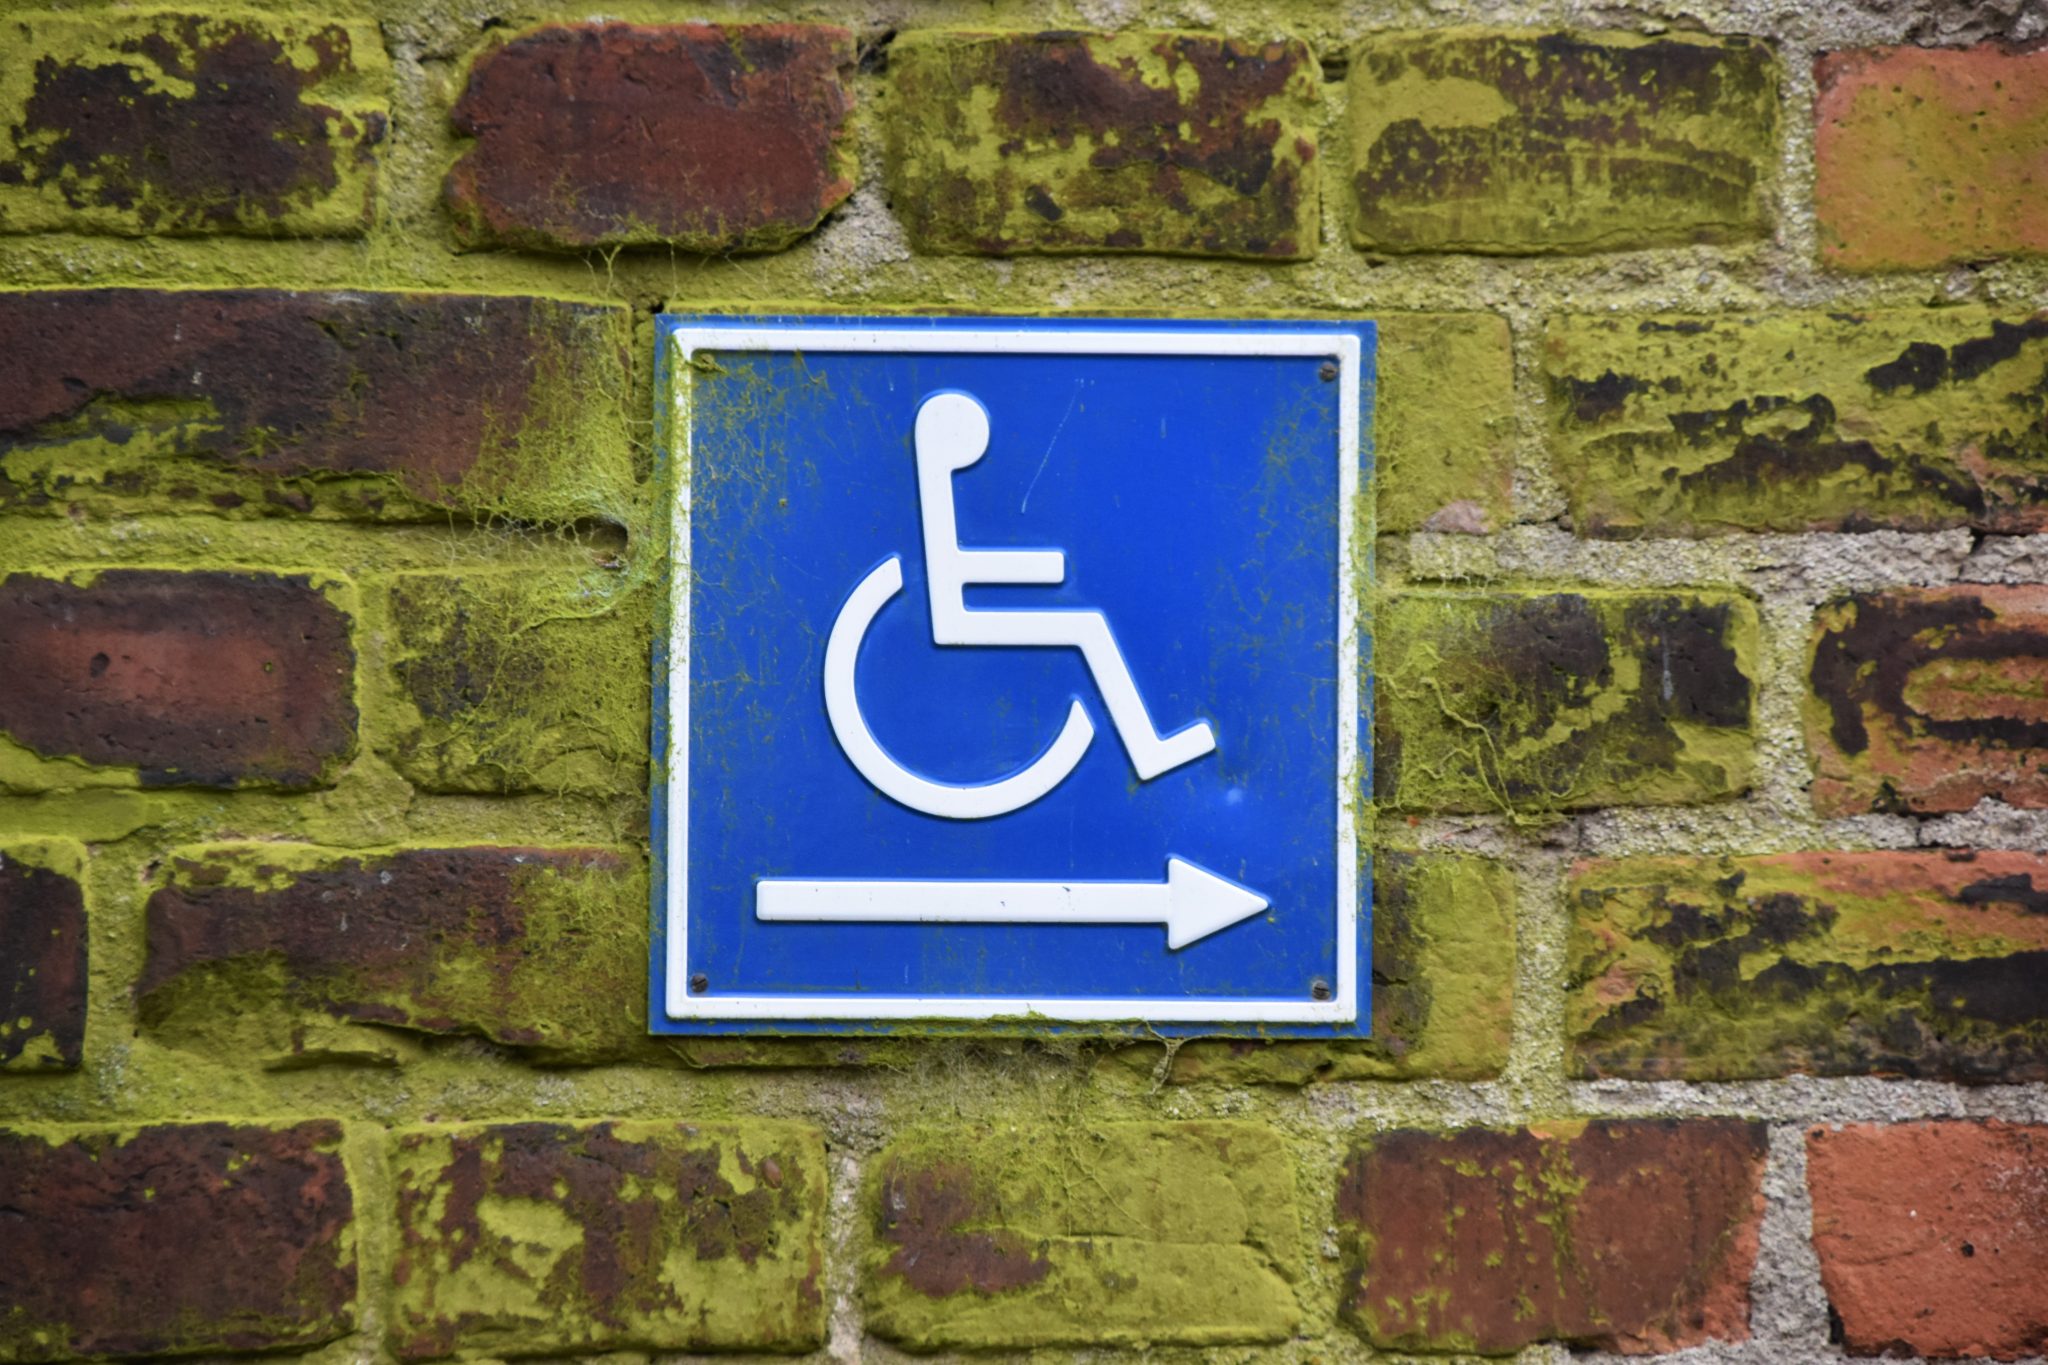 Wheel chair access sign pointing to the right.